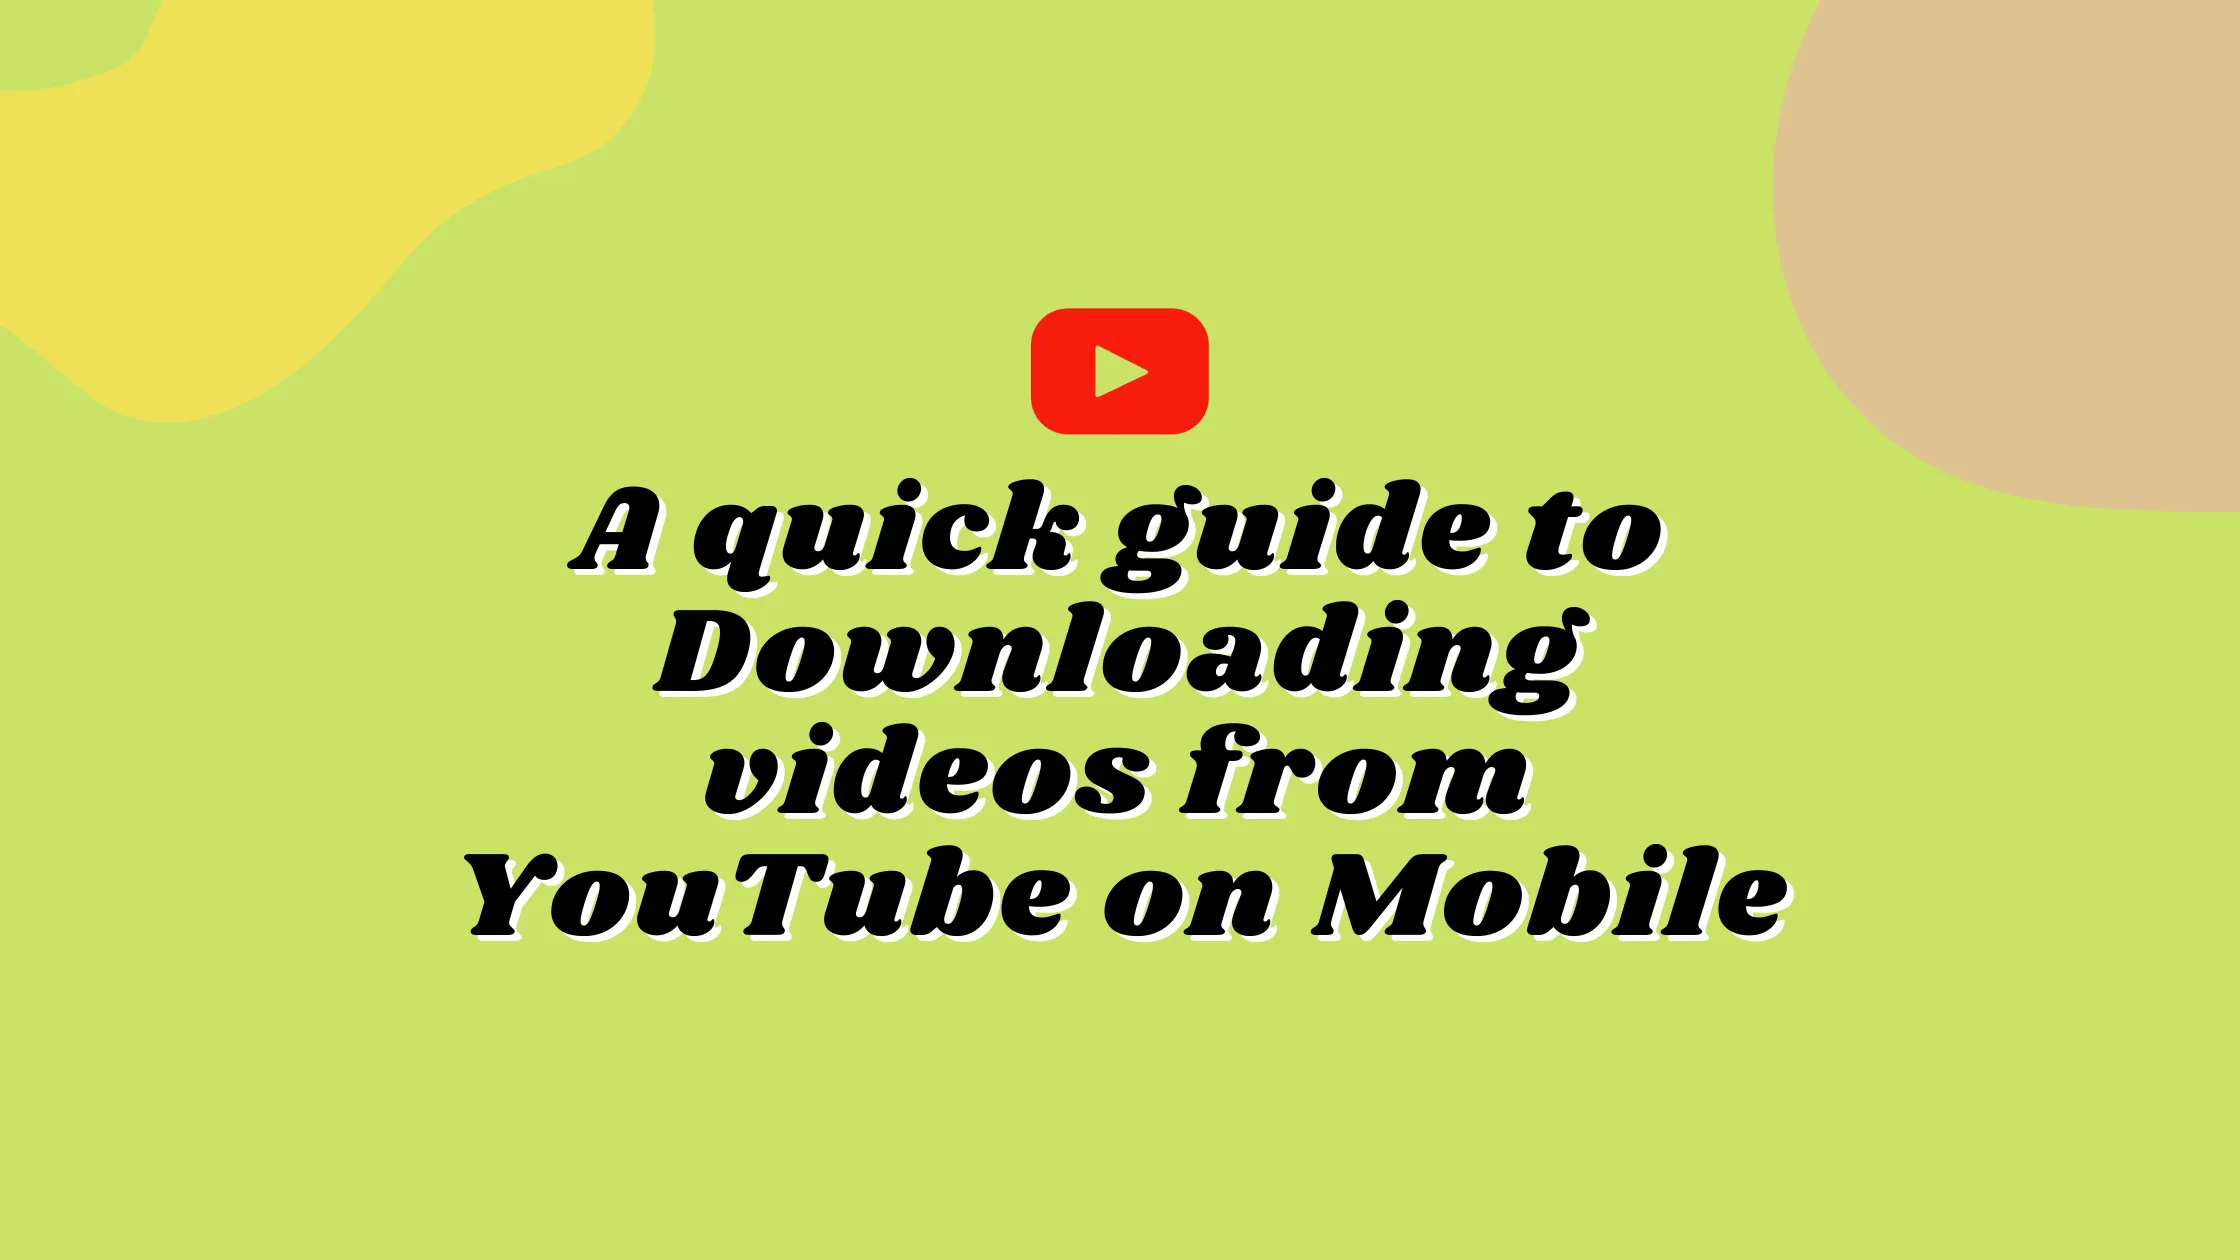 A quick guide to downloading videos from YouTube on Mobile